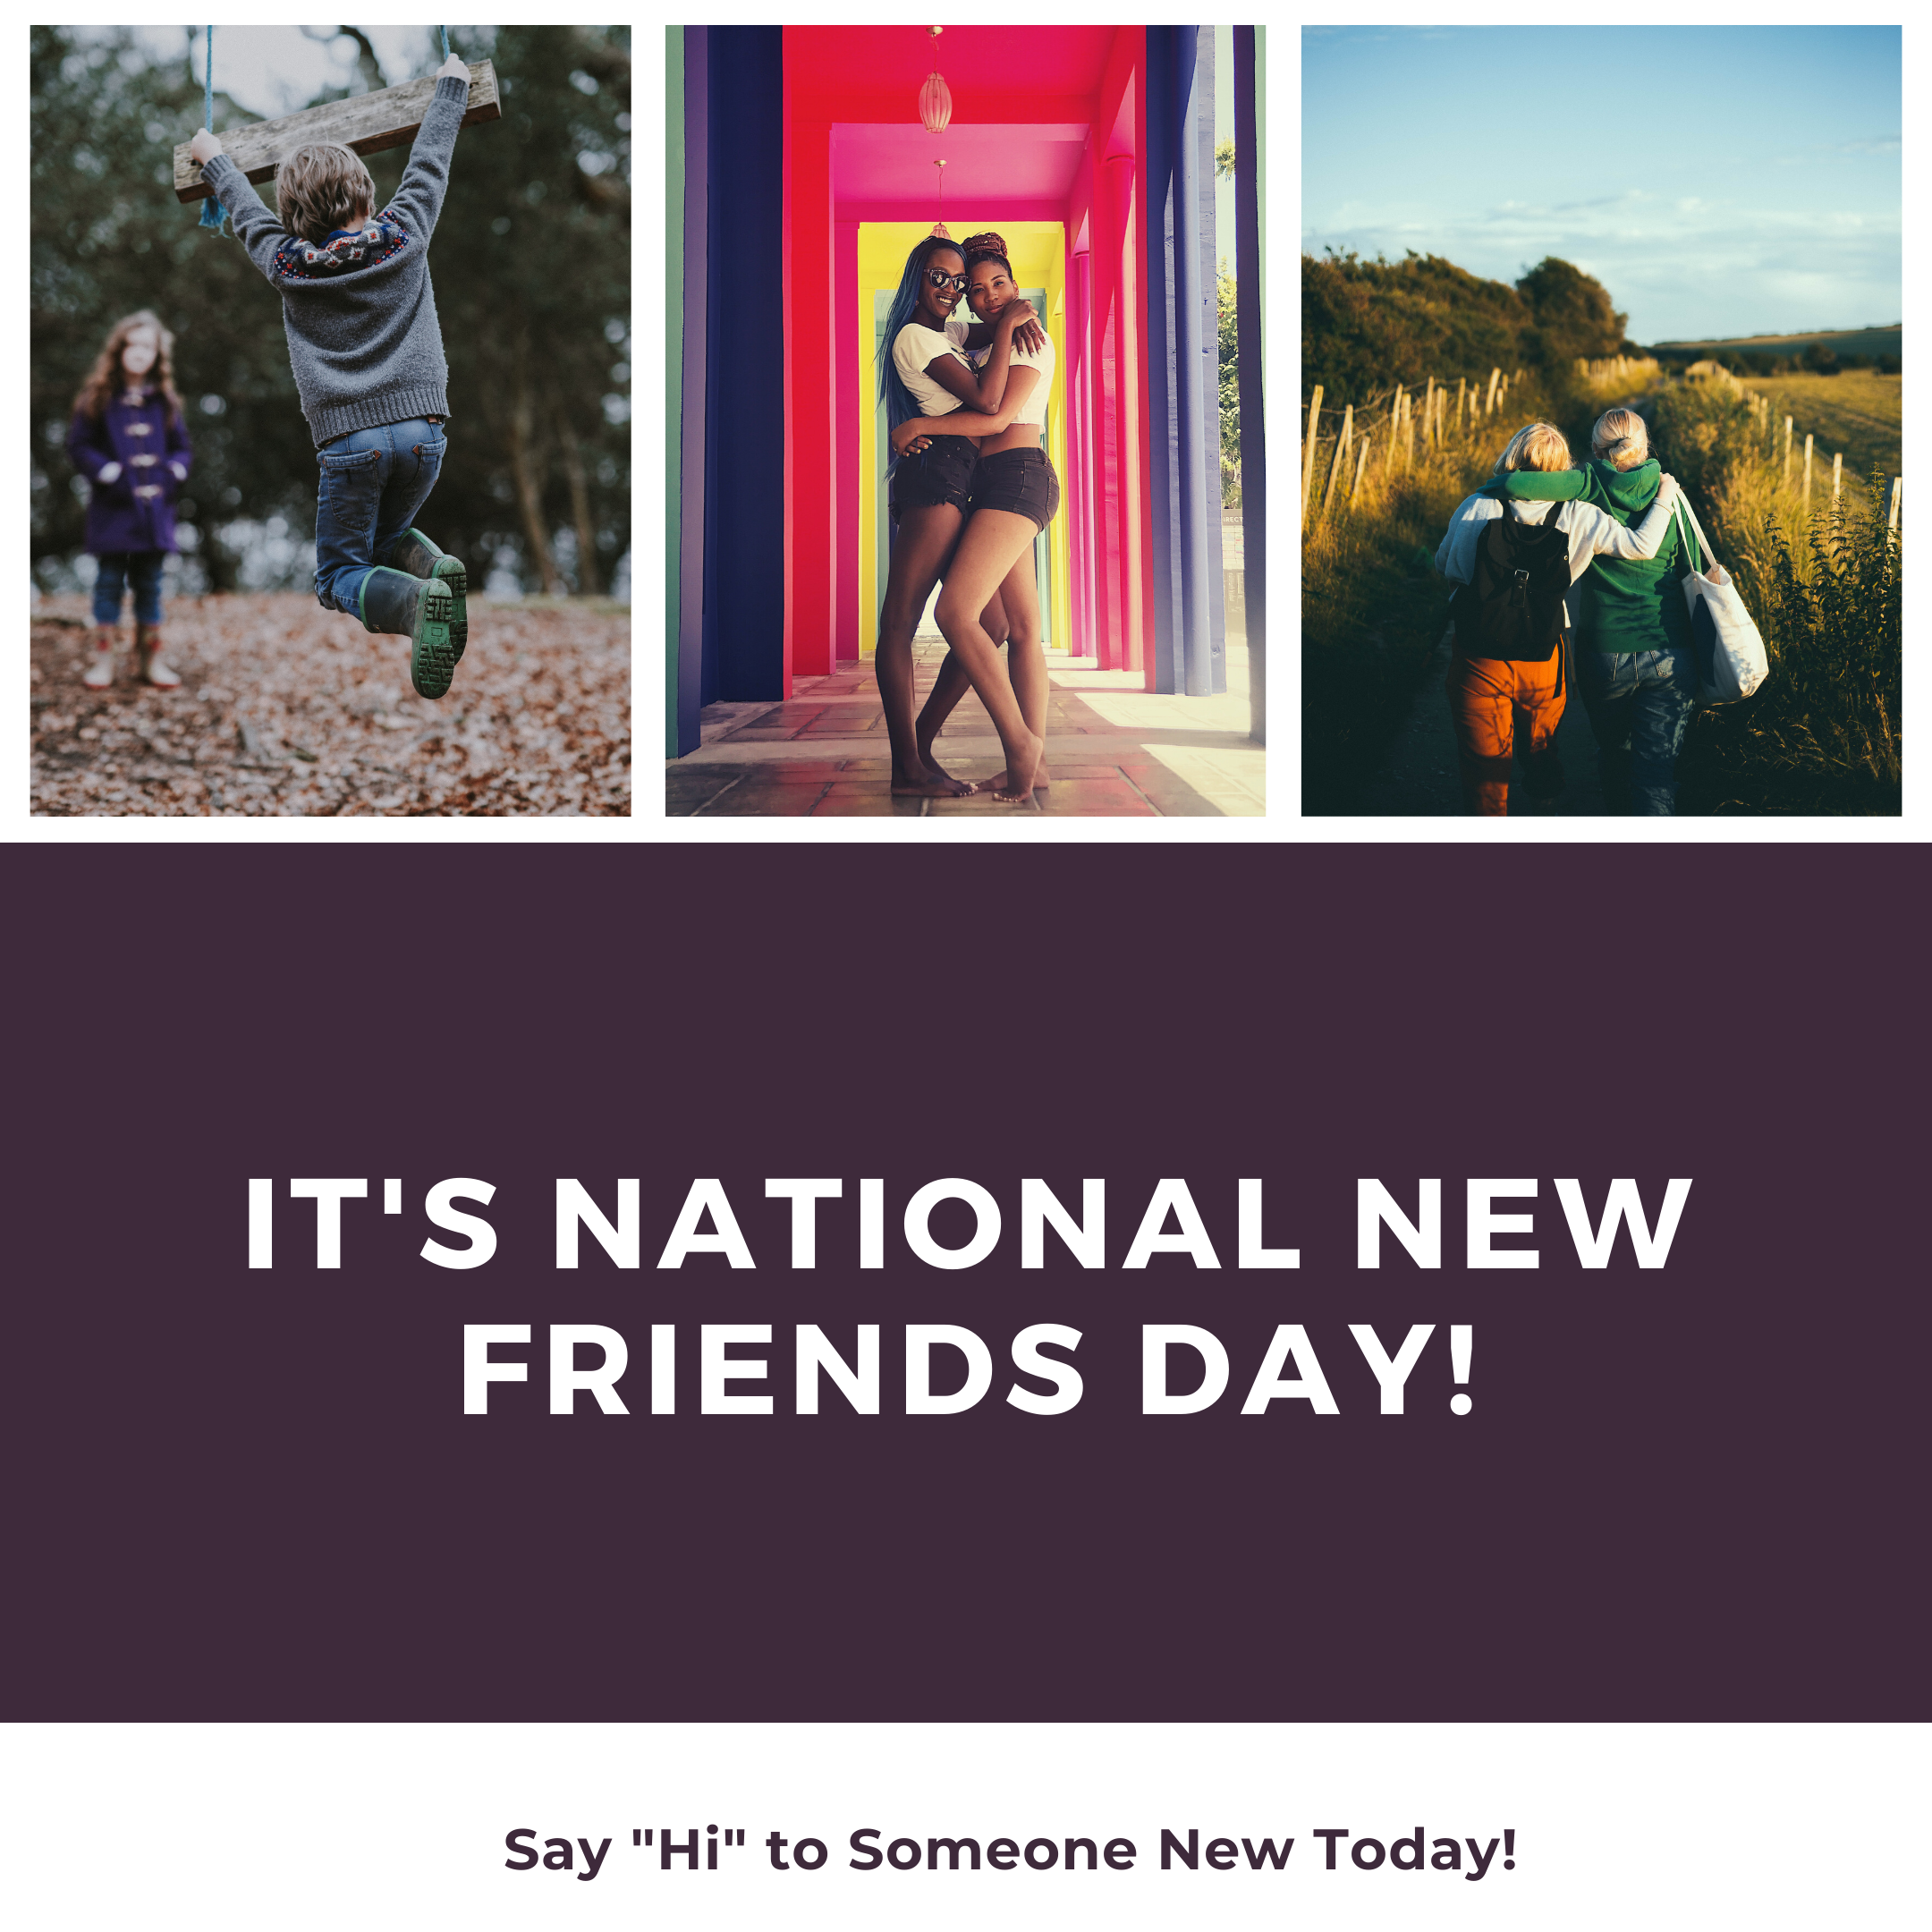 instagram-national-new-friends-day-6.png